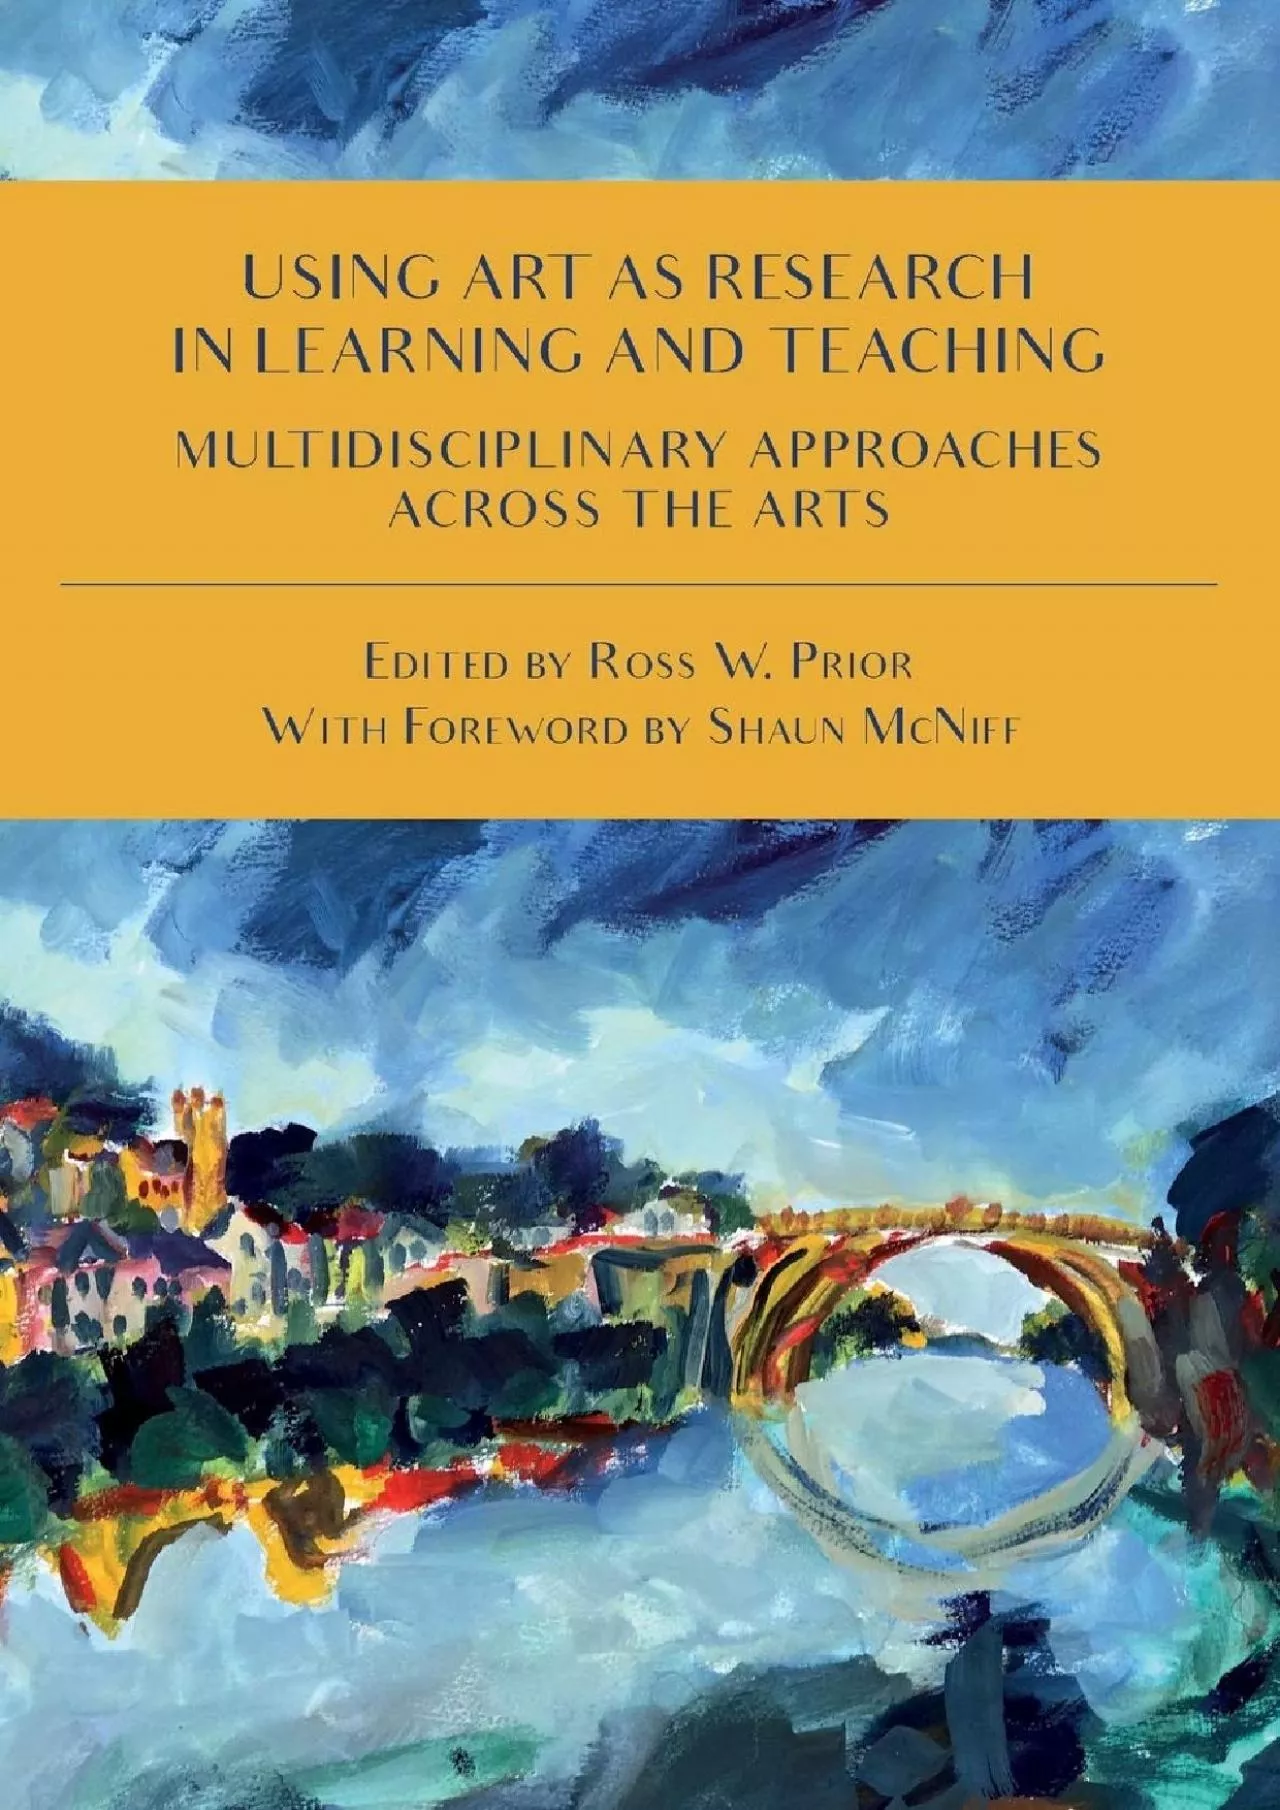 (DOWNLOAD)-Using Art as Research in Learning and Teaching: Multidisciplinary Approaches